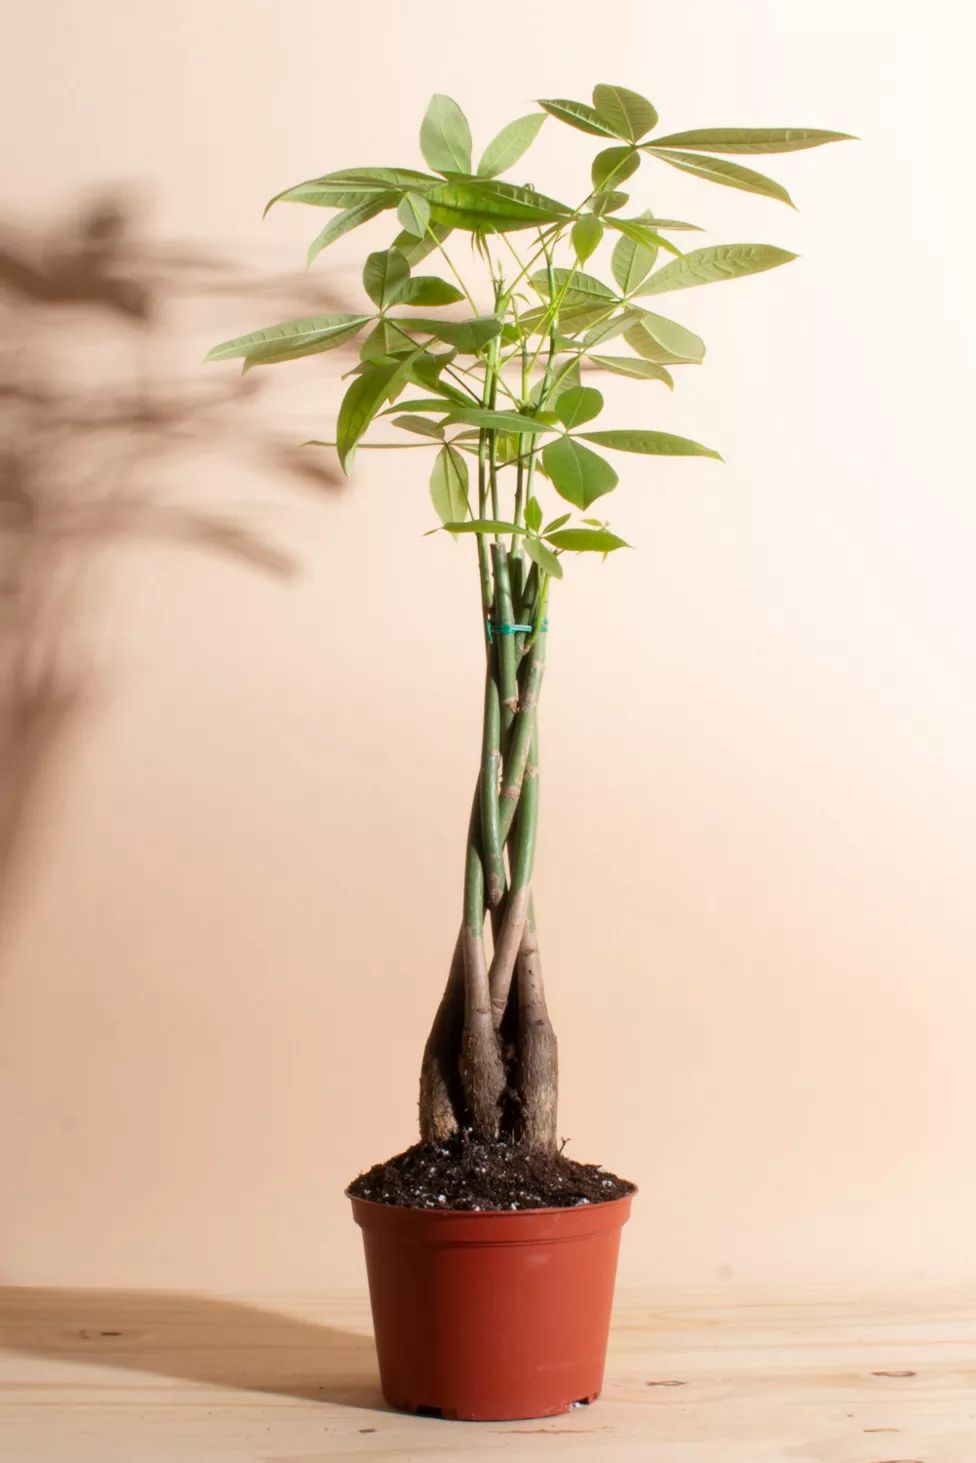 Home Botanicals Pachira Aquatica "Money Tree' House Plant in 6" Grow Pot | Urban Outfitters (US and RoW)